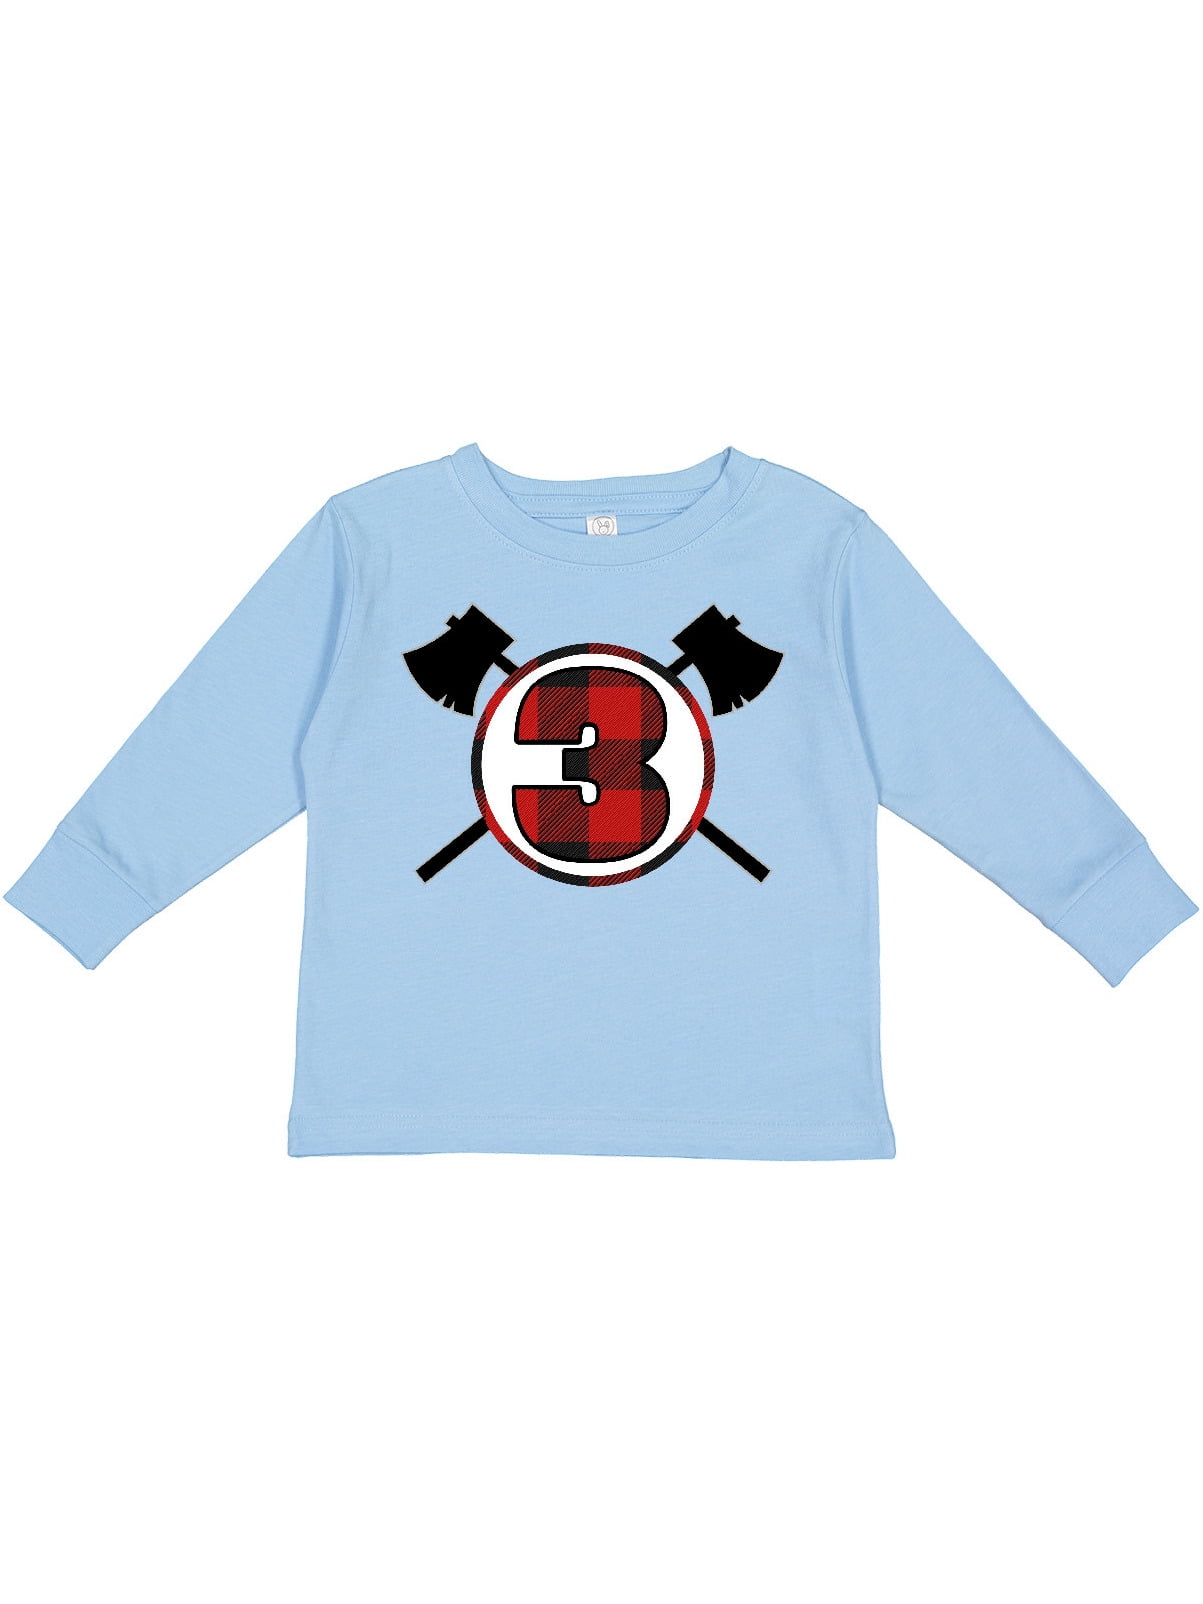 Custom Baby & Toddler T-Shirt Future Soccer Player St Lucia Boy Girl Clothes 